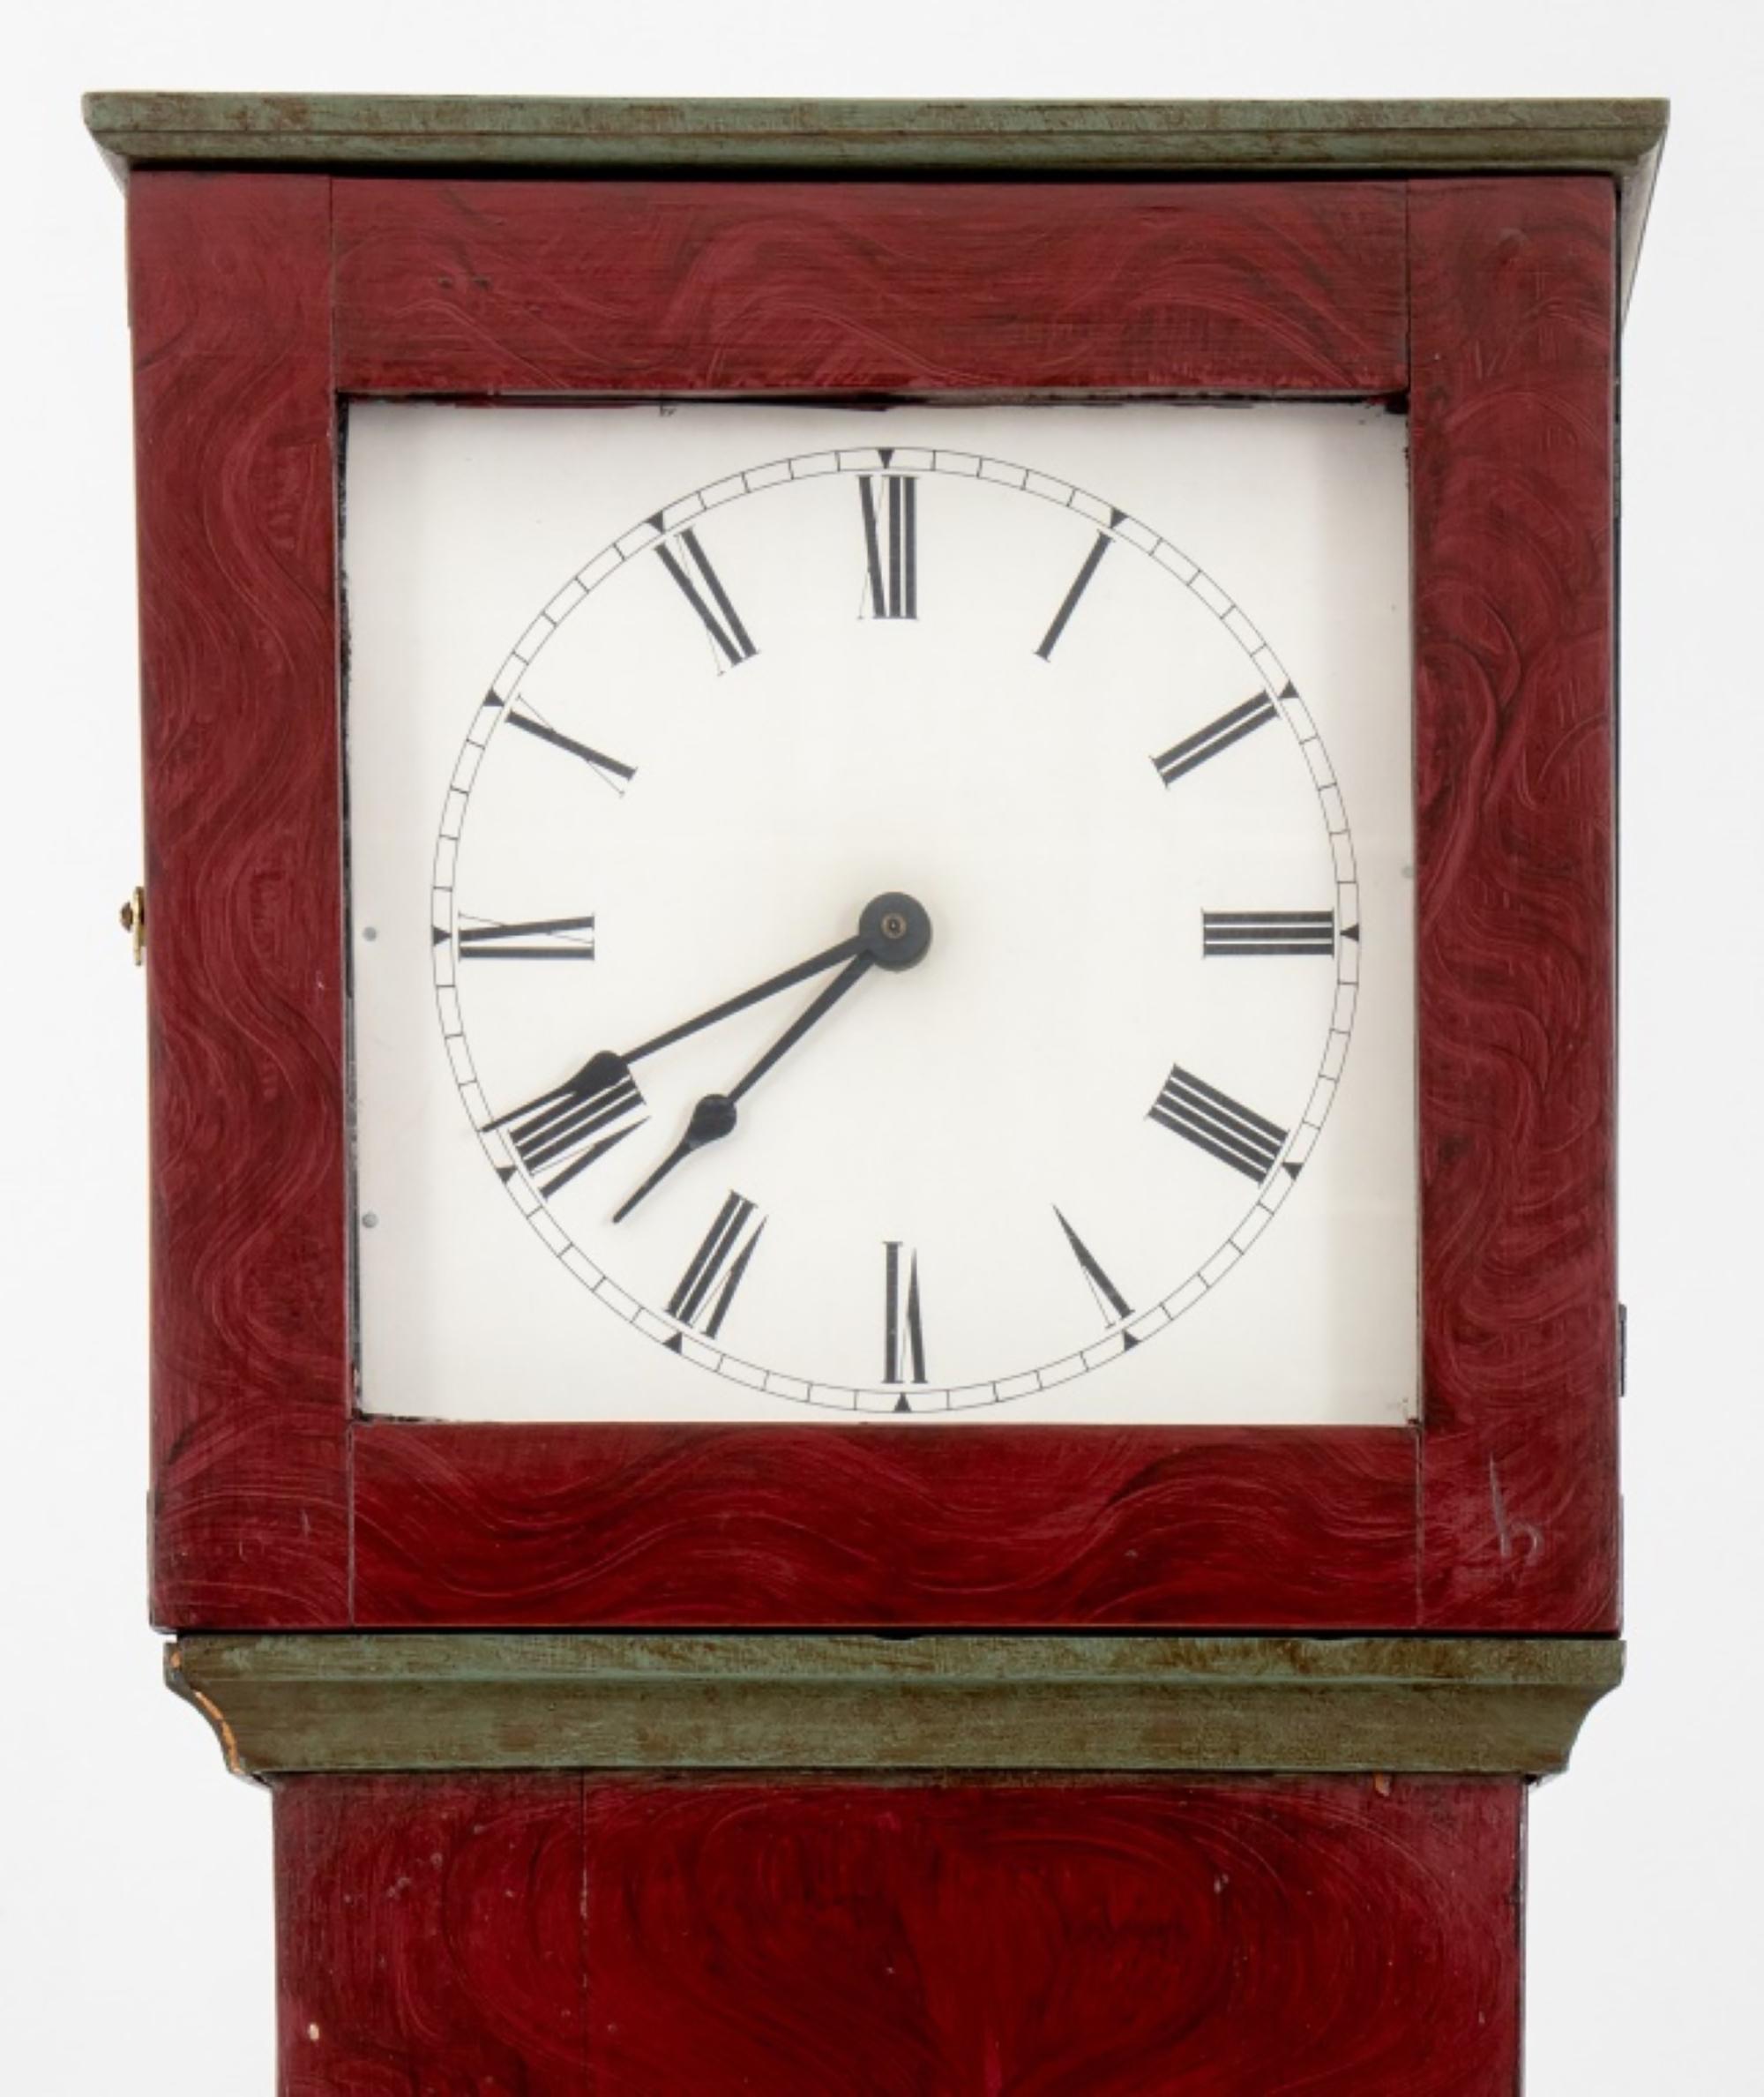 Shaker-Style Tall Case Grandfather Clock from the 20th century, painted red and black. Here are the details:

Style: Shaker-Style
Type: Tall Case Grandfather Clock
Period: 20th century
Finish: Red and Black paint
Provenance: From the 50 East 89th